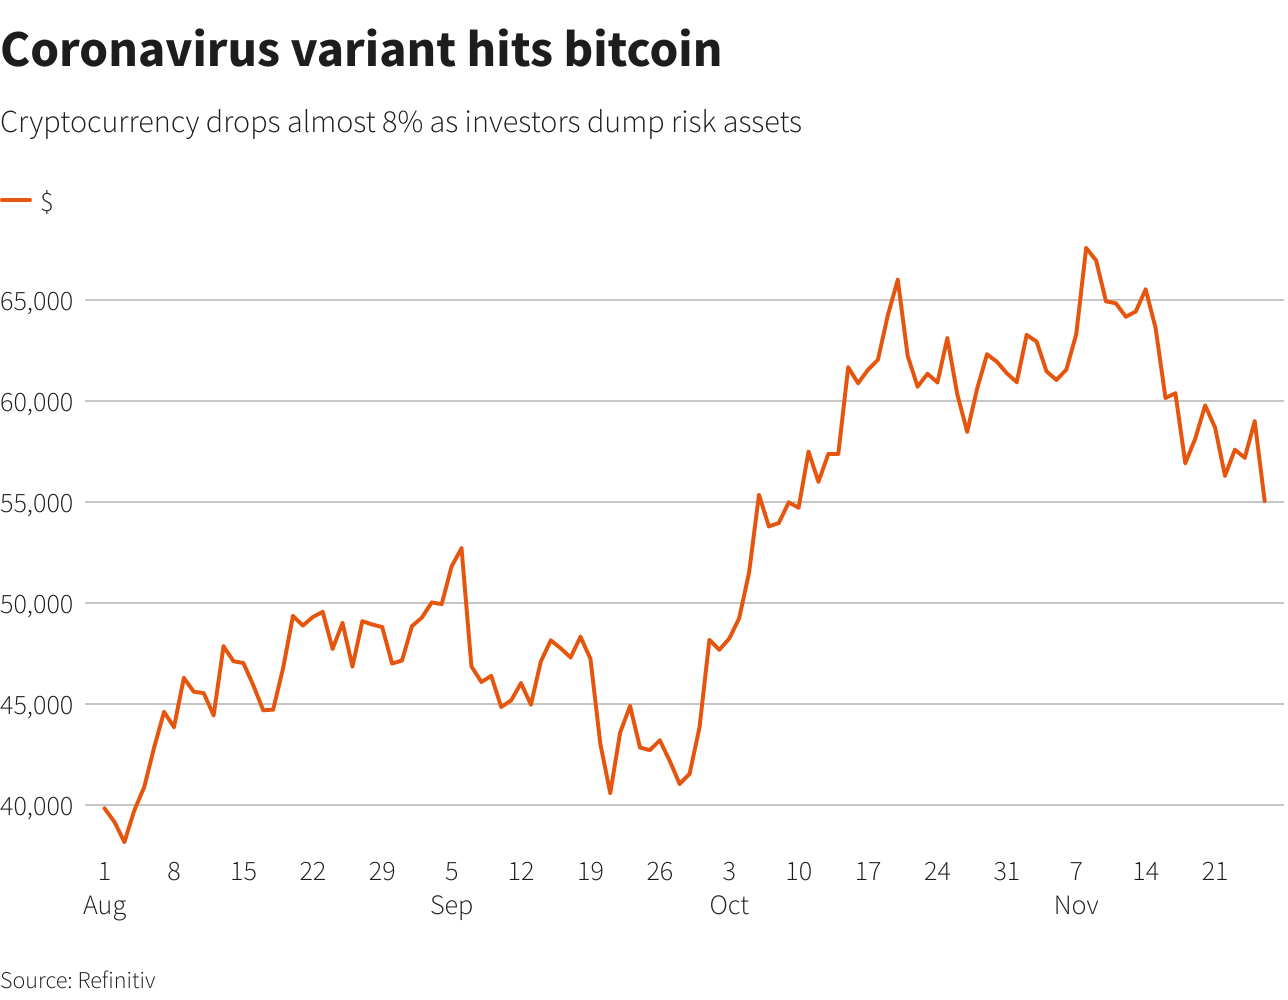 Cryptocurrencies are falling while the coronavirus variant is shaking markets